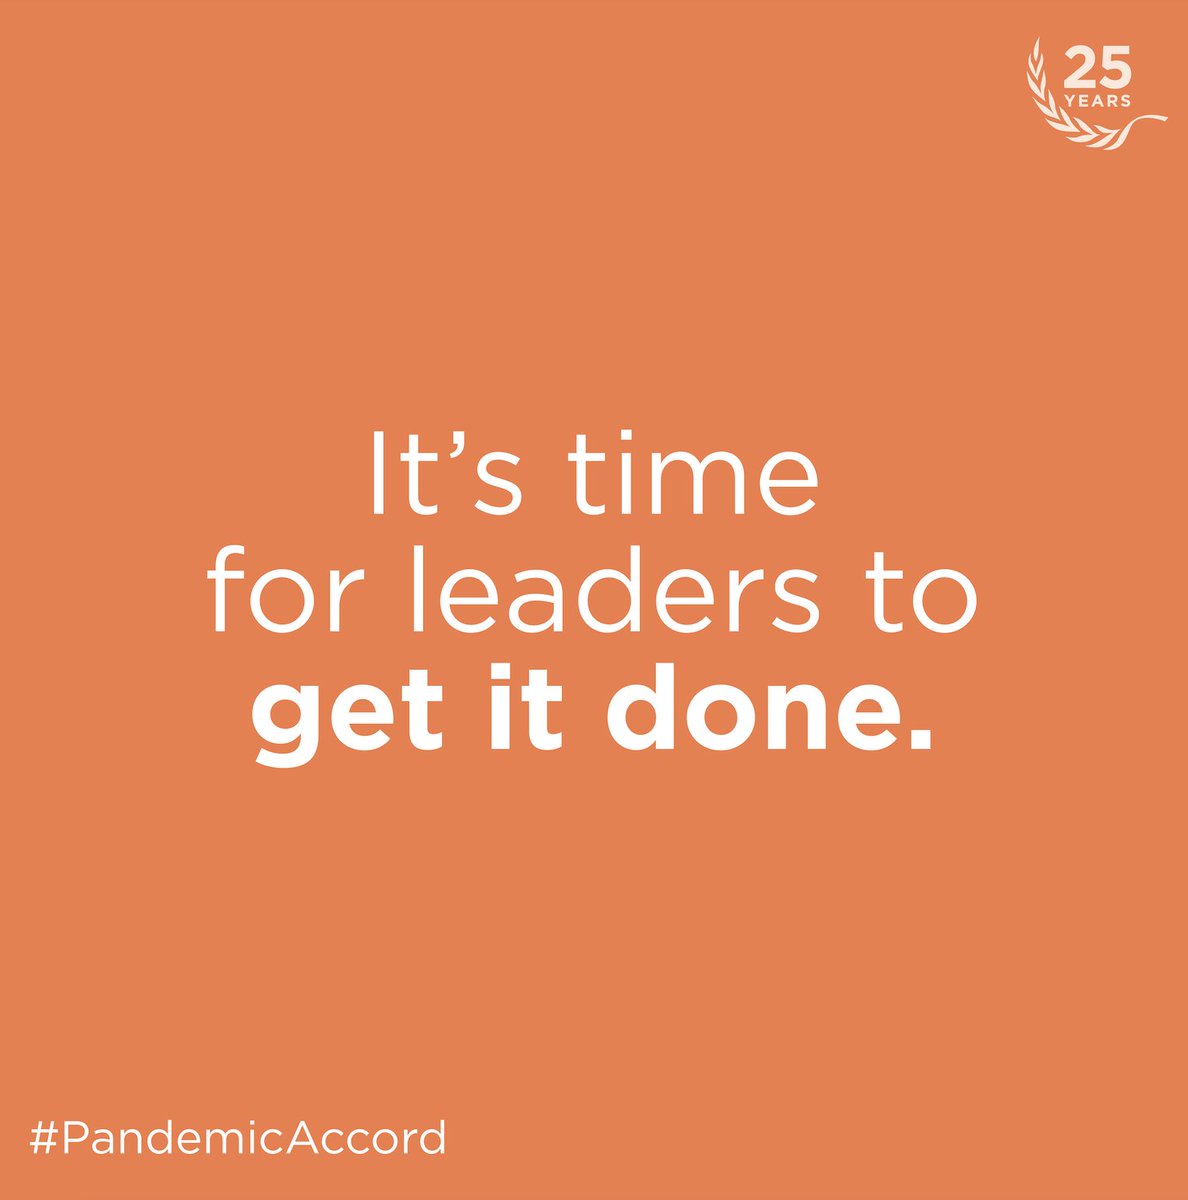 We can't afford to have any weak links when it comes to global health security. The #PandemicAccord is essential for a safer world and future. Negotiations are almost over. We need leaders to #GetItDone for the health and well-being of everyone, everywhere.